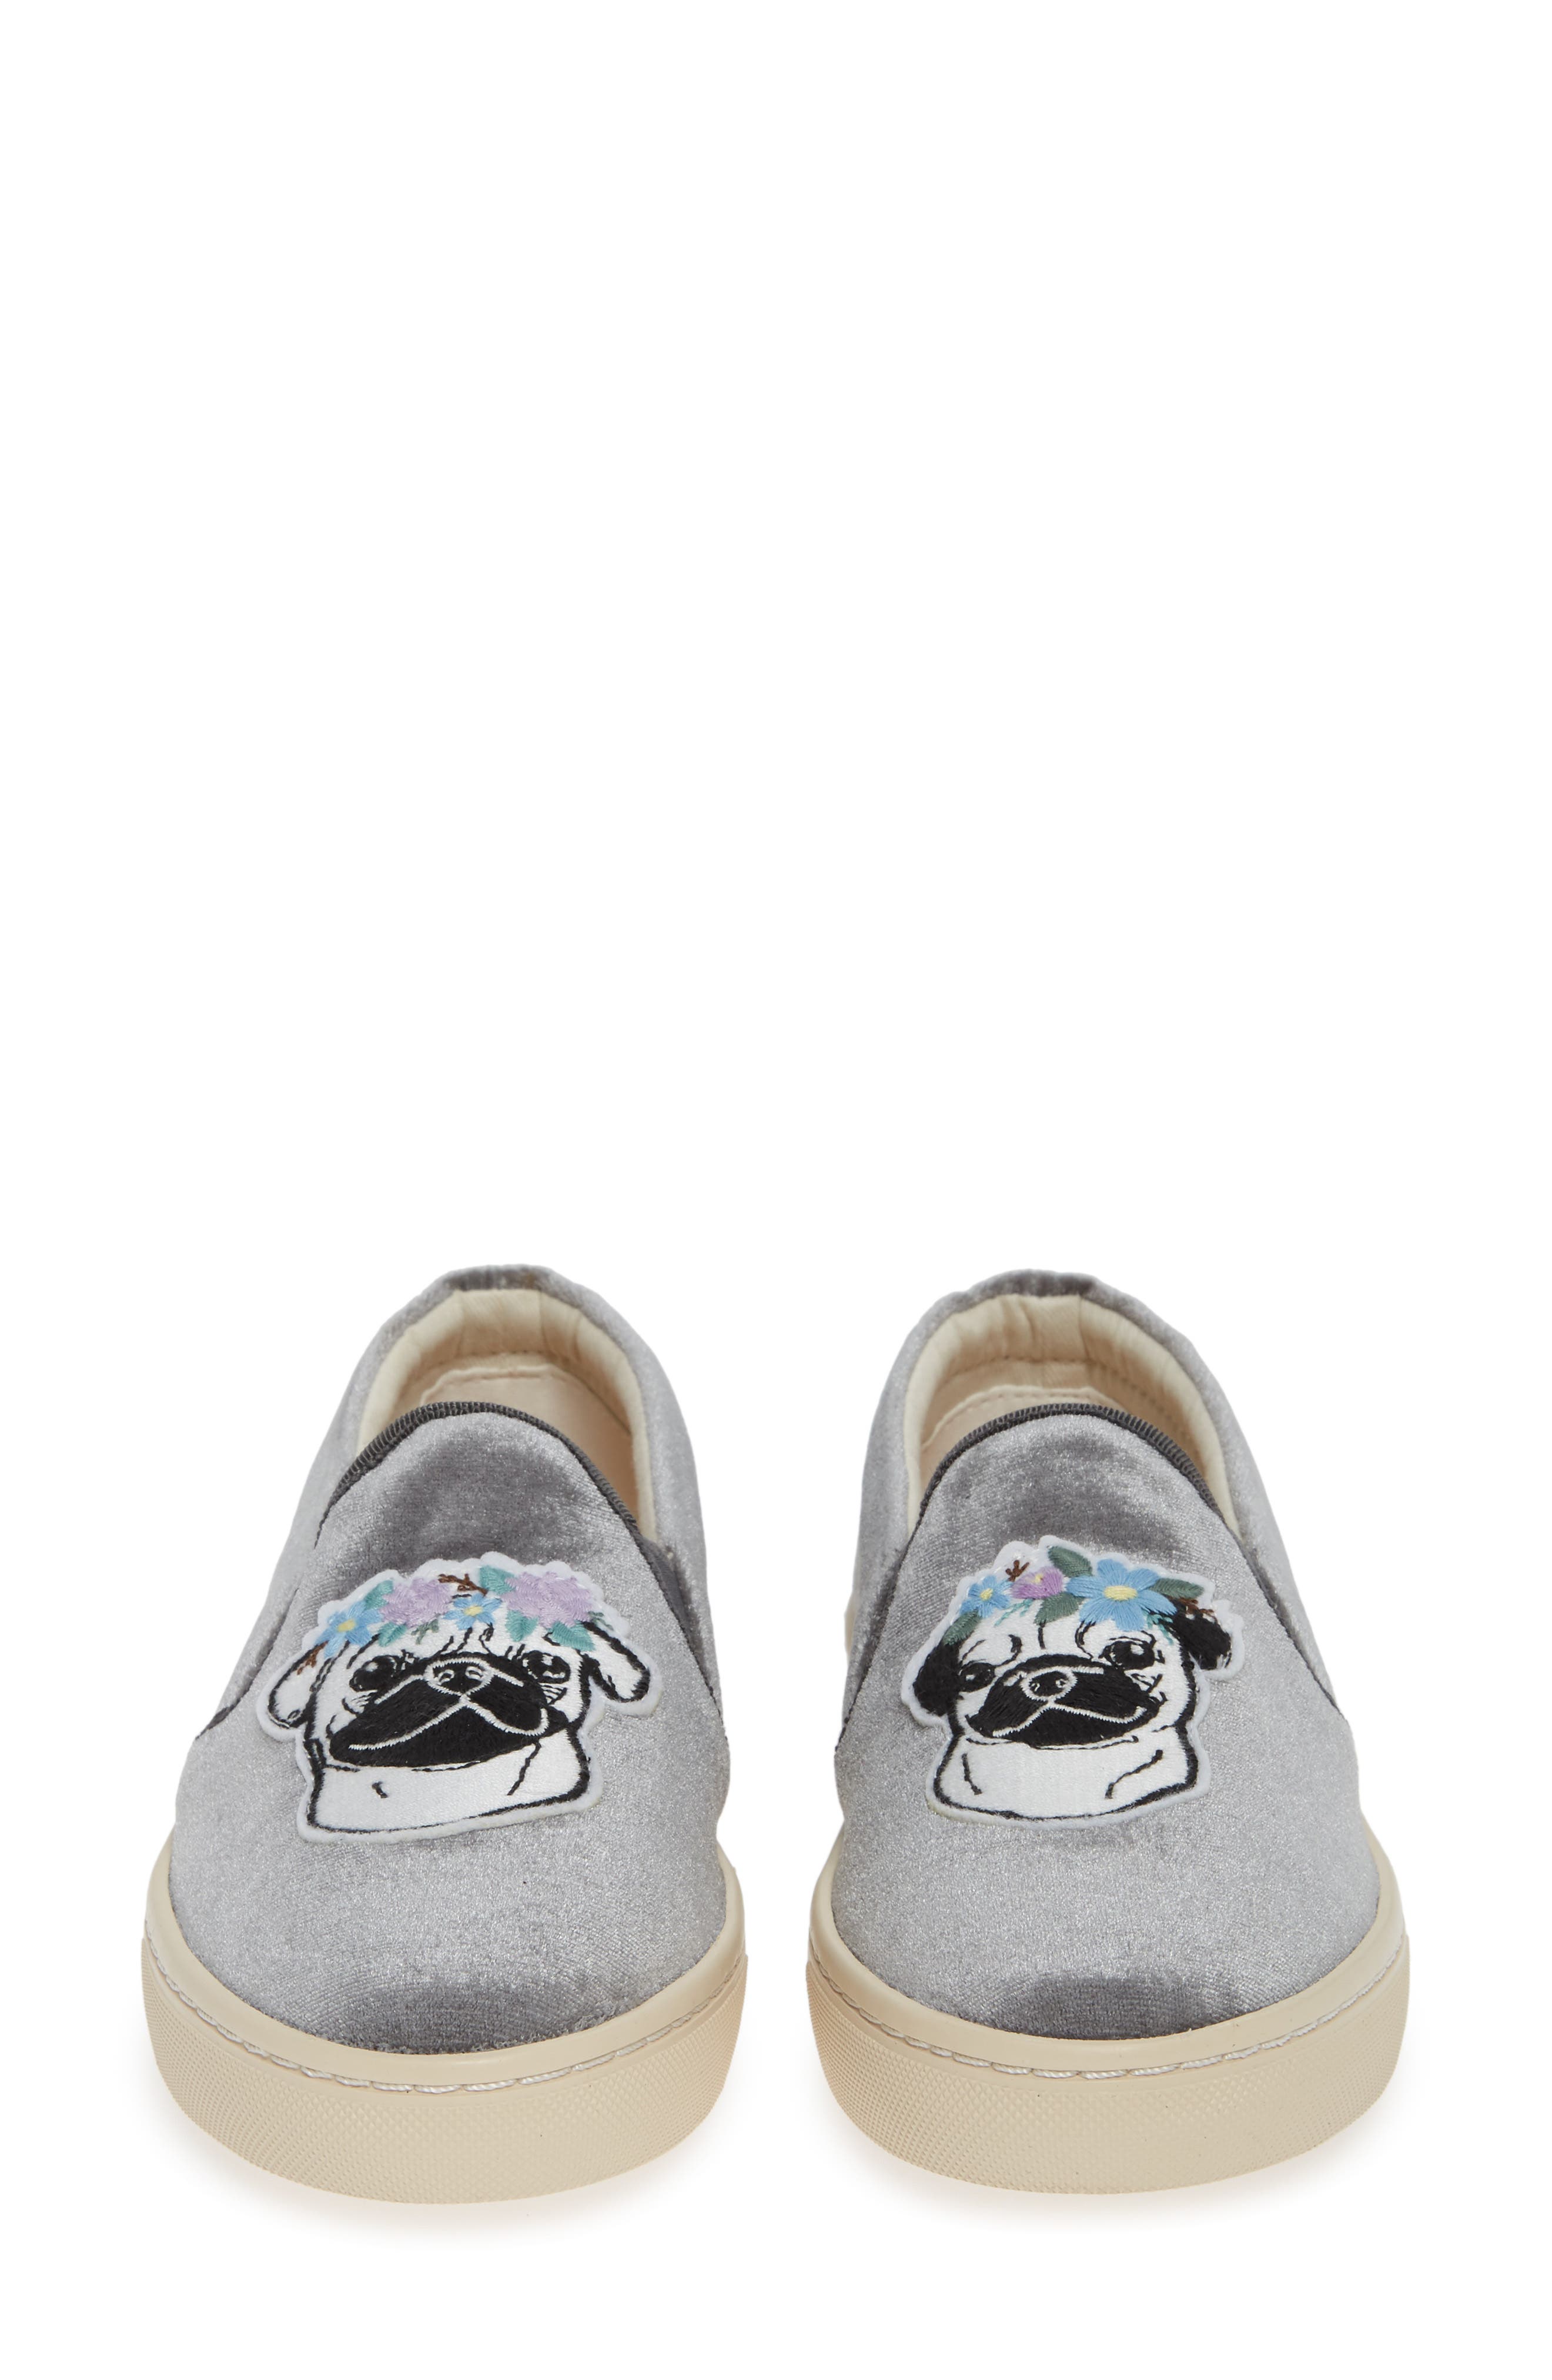 soludos pug sneakers